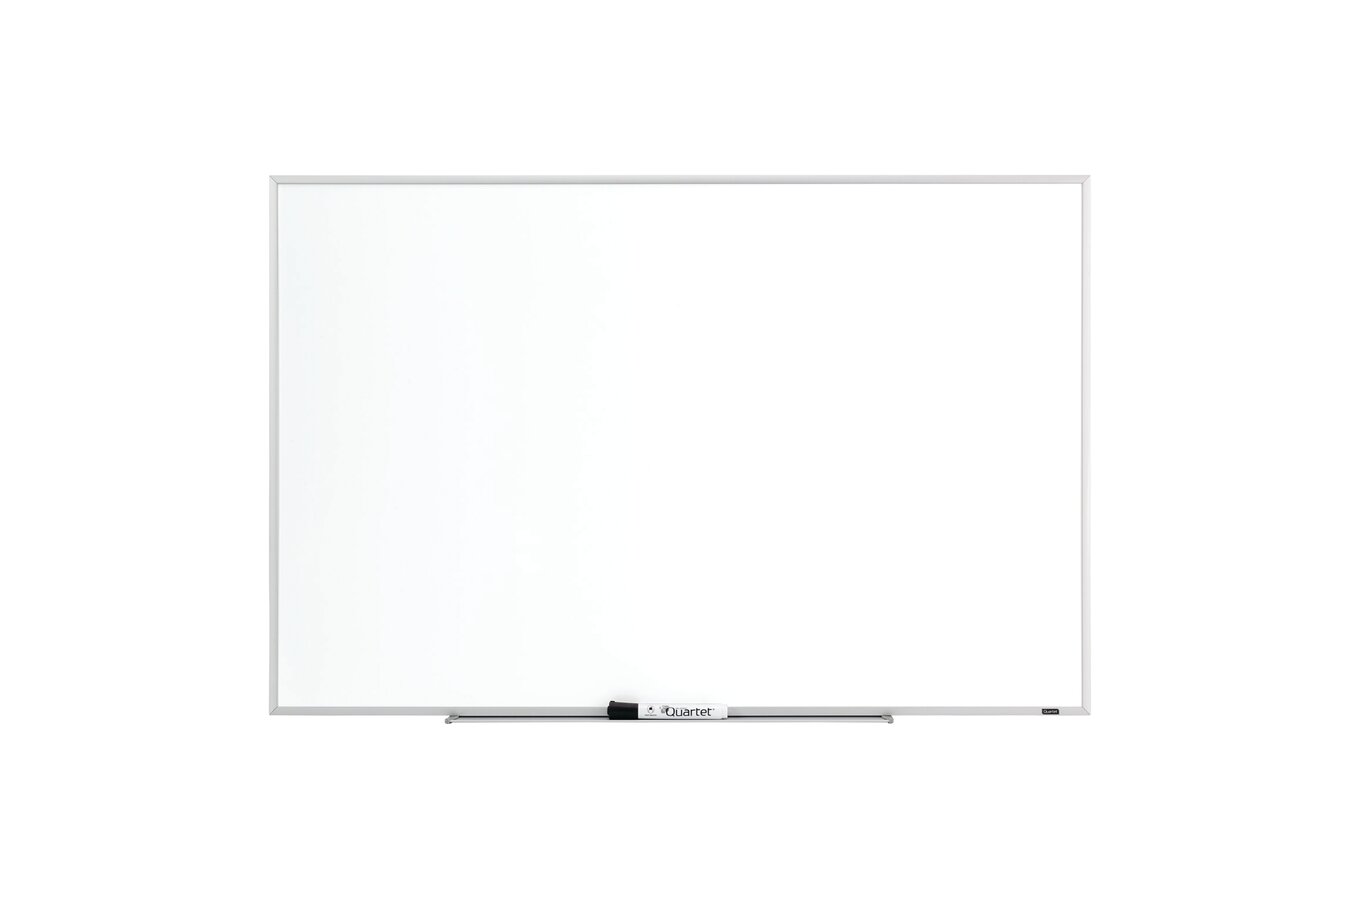 CreGear Magnetic Dry Erase Board, 2 Pack 36 X 24 Inches White Boards for  Wall, 3' x 2' Large Whiteboard with Detachable Pen Tray for Office, School